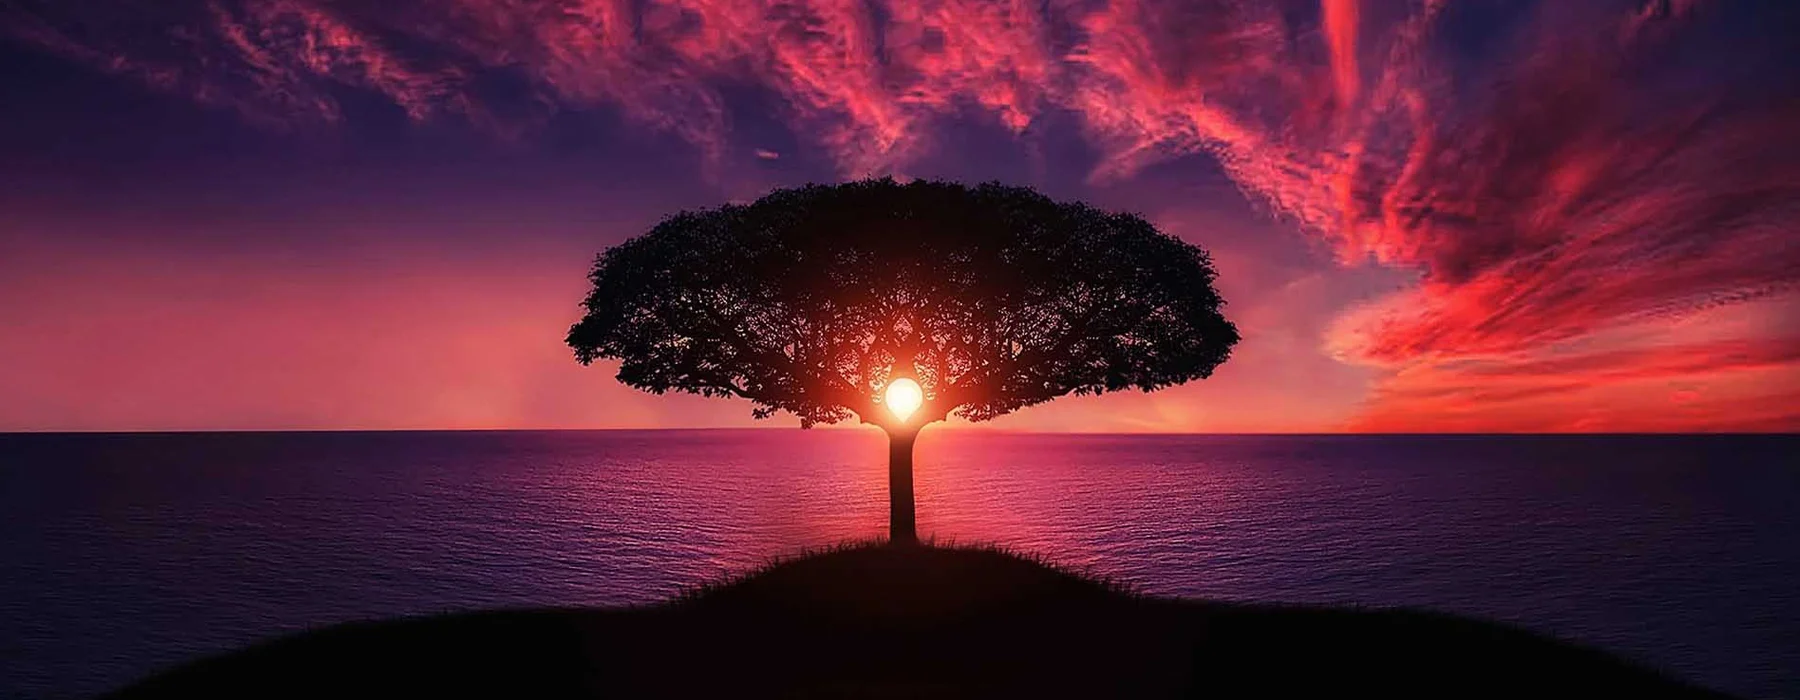 A sunset painting the sky red over the ocean with the last rays of the sun shining through the branches of a single tree.